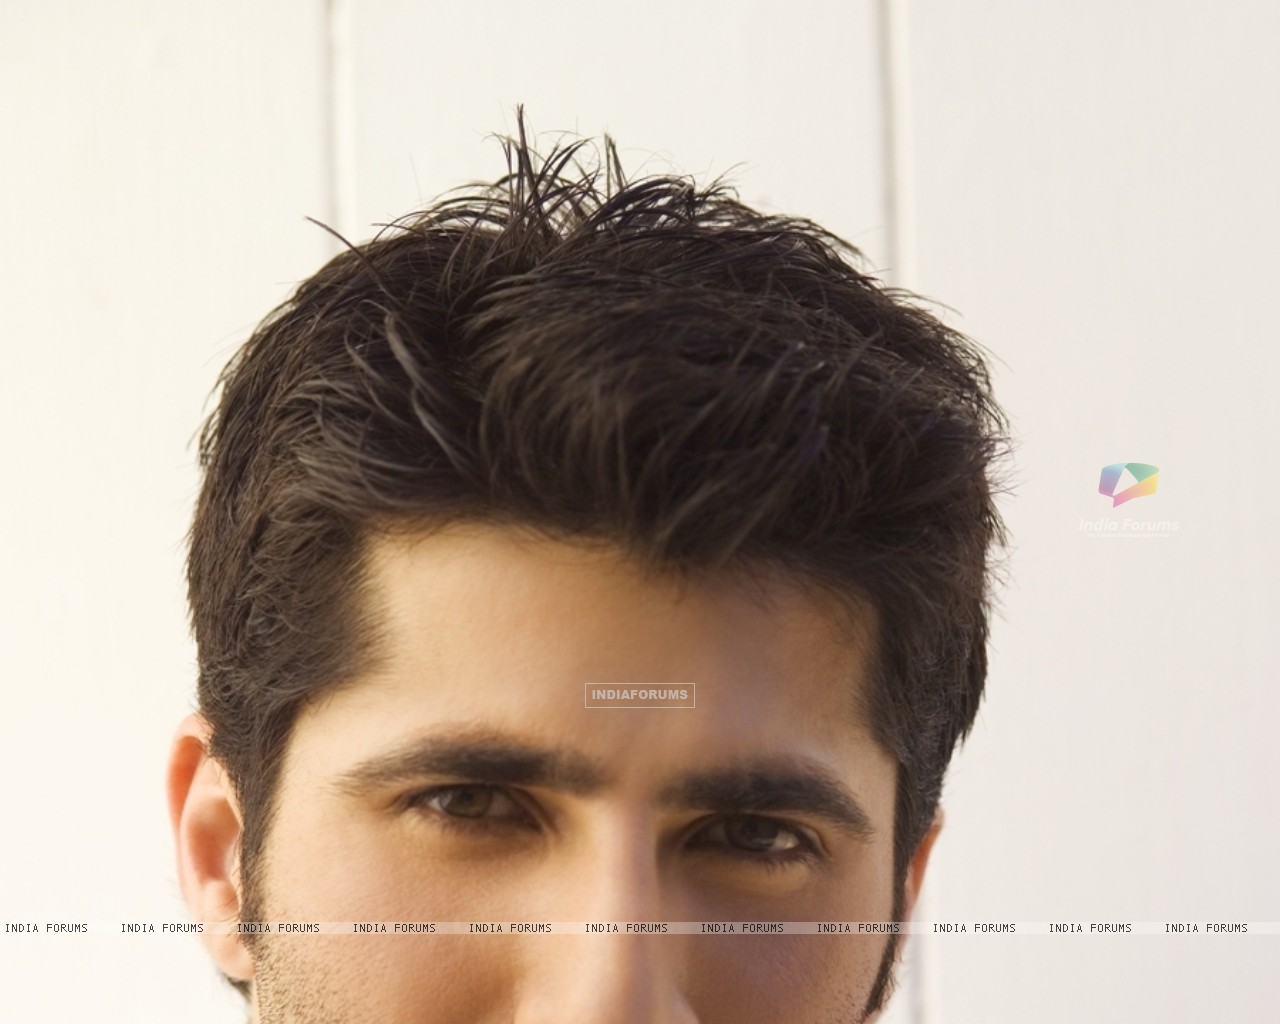 sumit wallpaper,hair,face,forehead,eyebrow,hairstyle